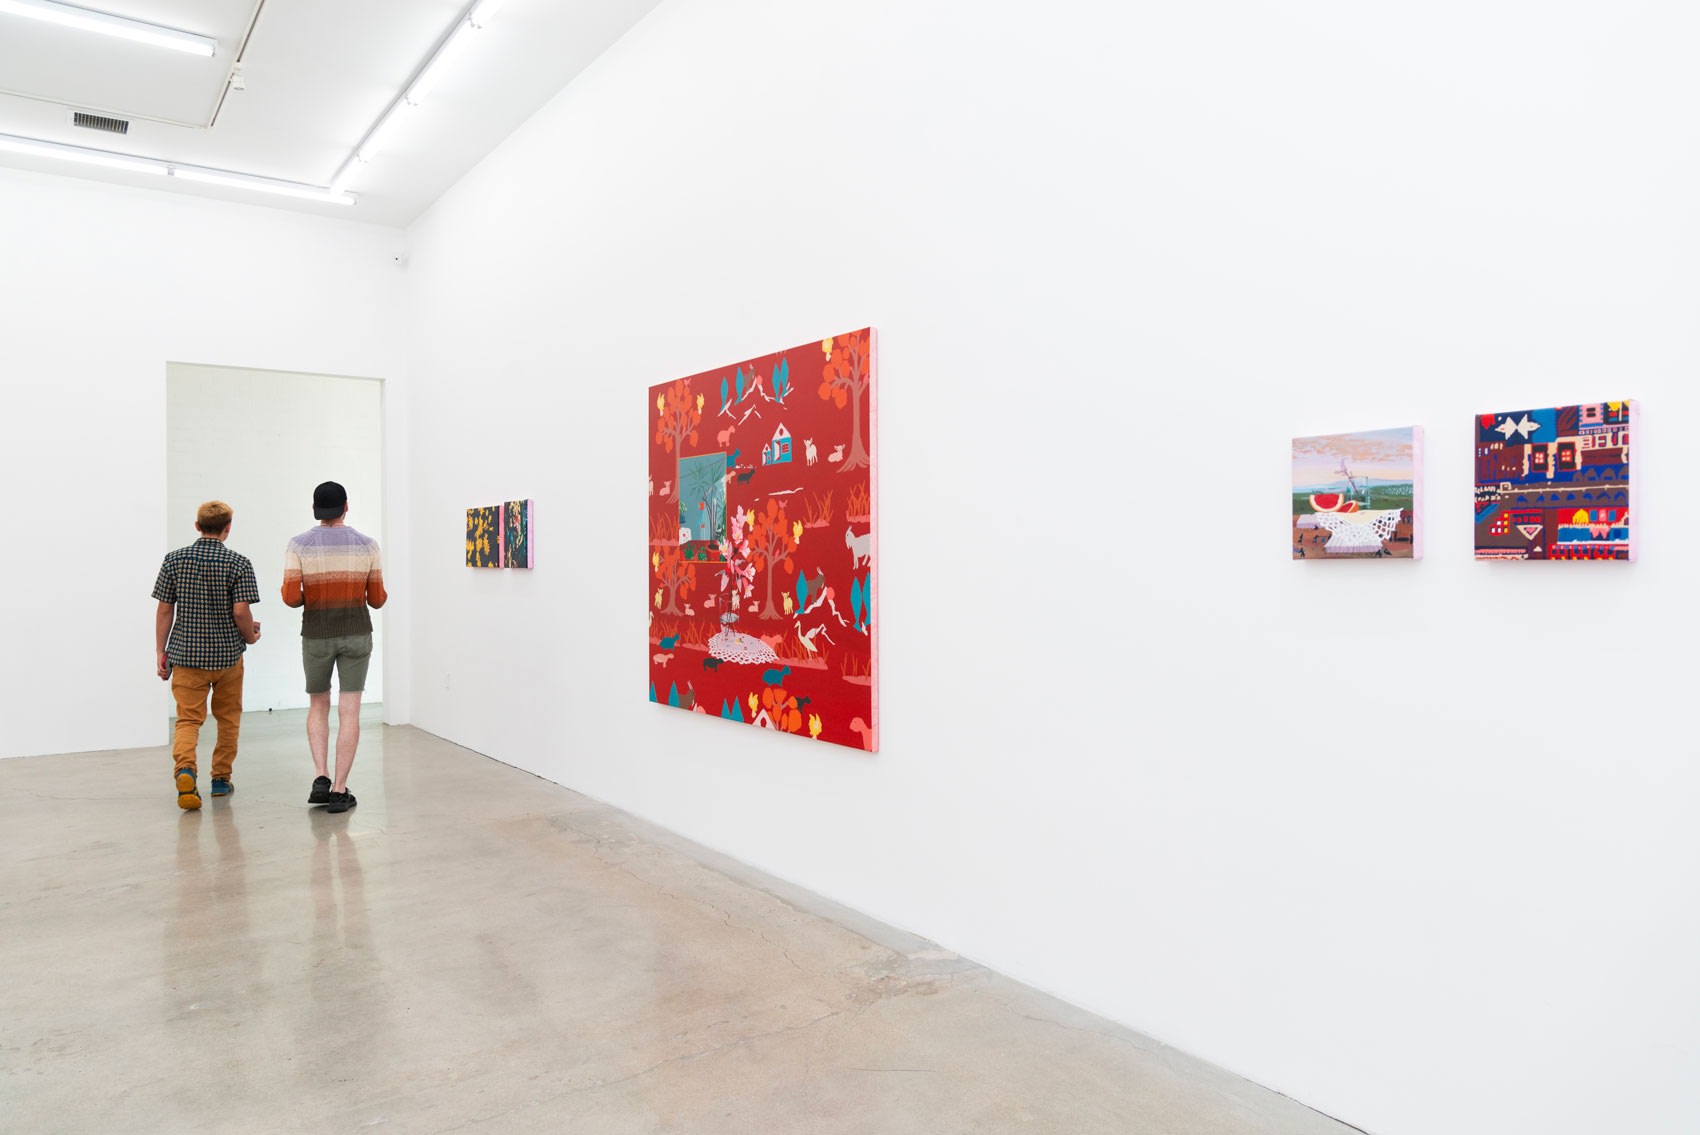 attendees at the opening of Where Dreams Touch Ground, a solo show by Francisco Díaz Scotto. A red painting hangs on a white wall in a cavernous room with concrete floors.